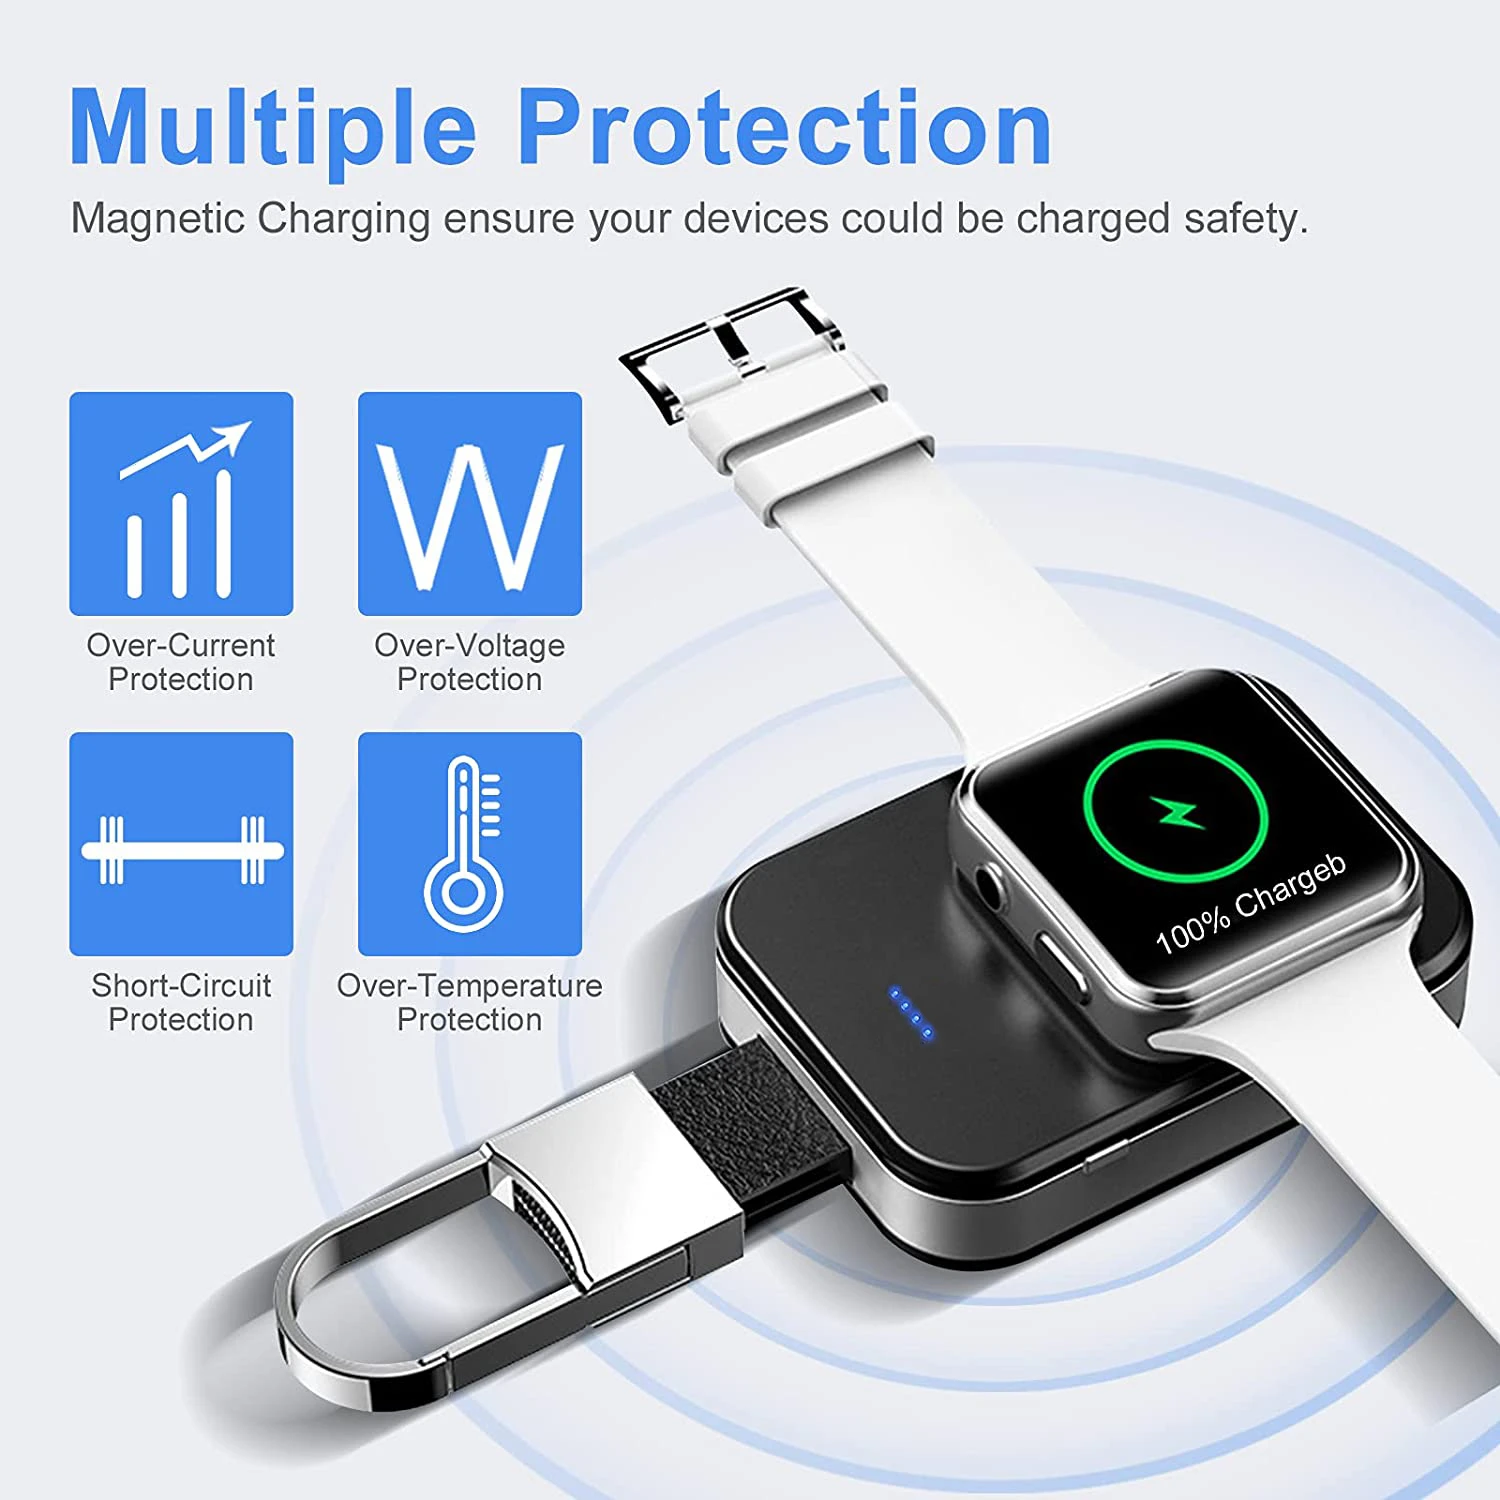 power bank portable charger 1000mAh Magnetic Keychain Power Bank Wireless Charger For Apple Watch Series 7 6 5 4 3 Powerbank Chargers With 4 LED Indicators usb battery pack